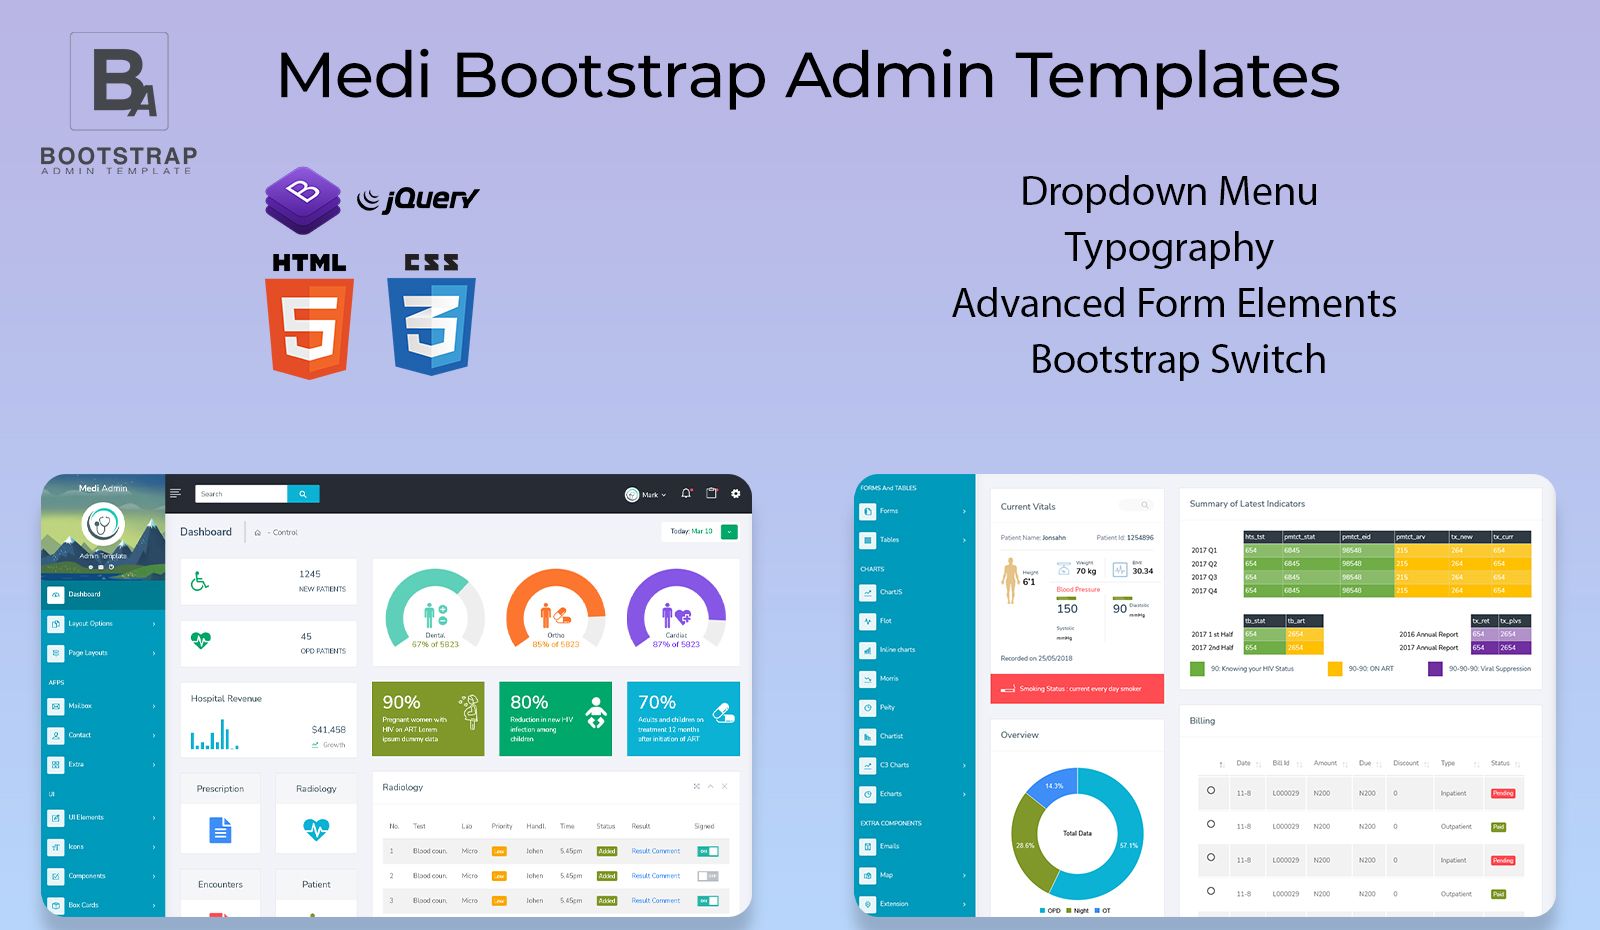 Bootstrap Admin Templates Dashboard UI Framework With Web Apps Templates – Medi